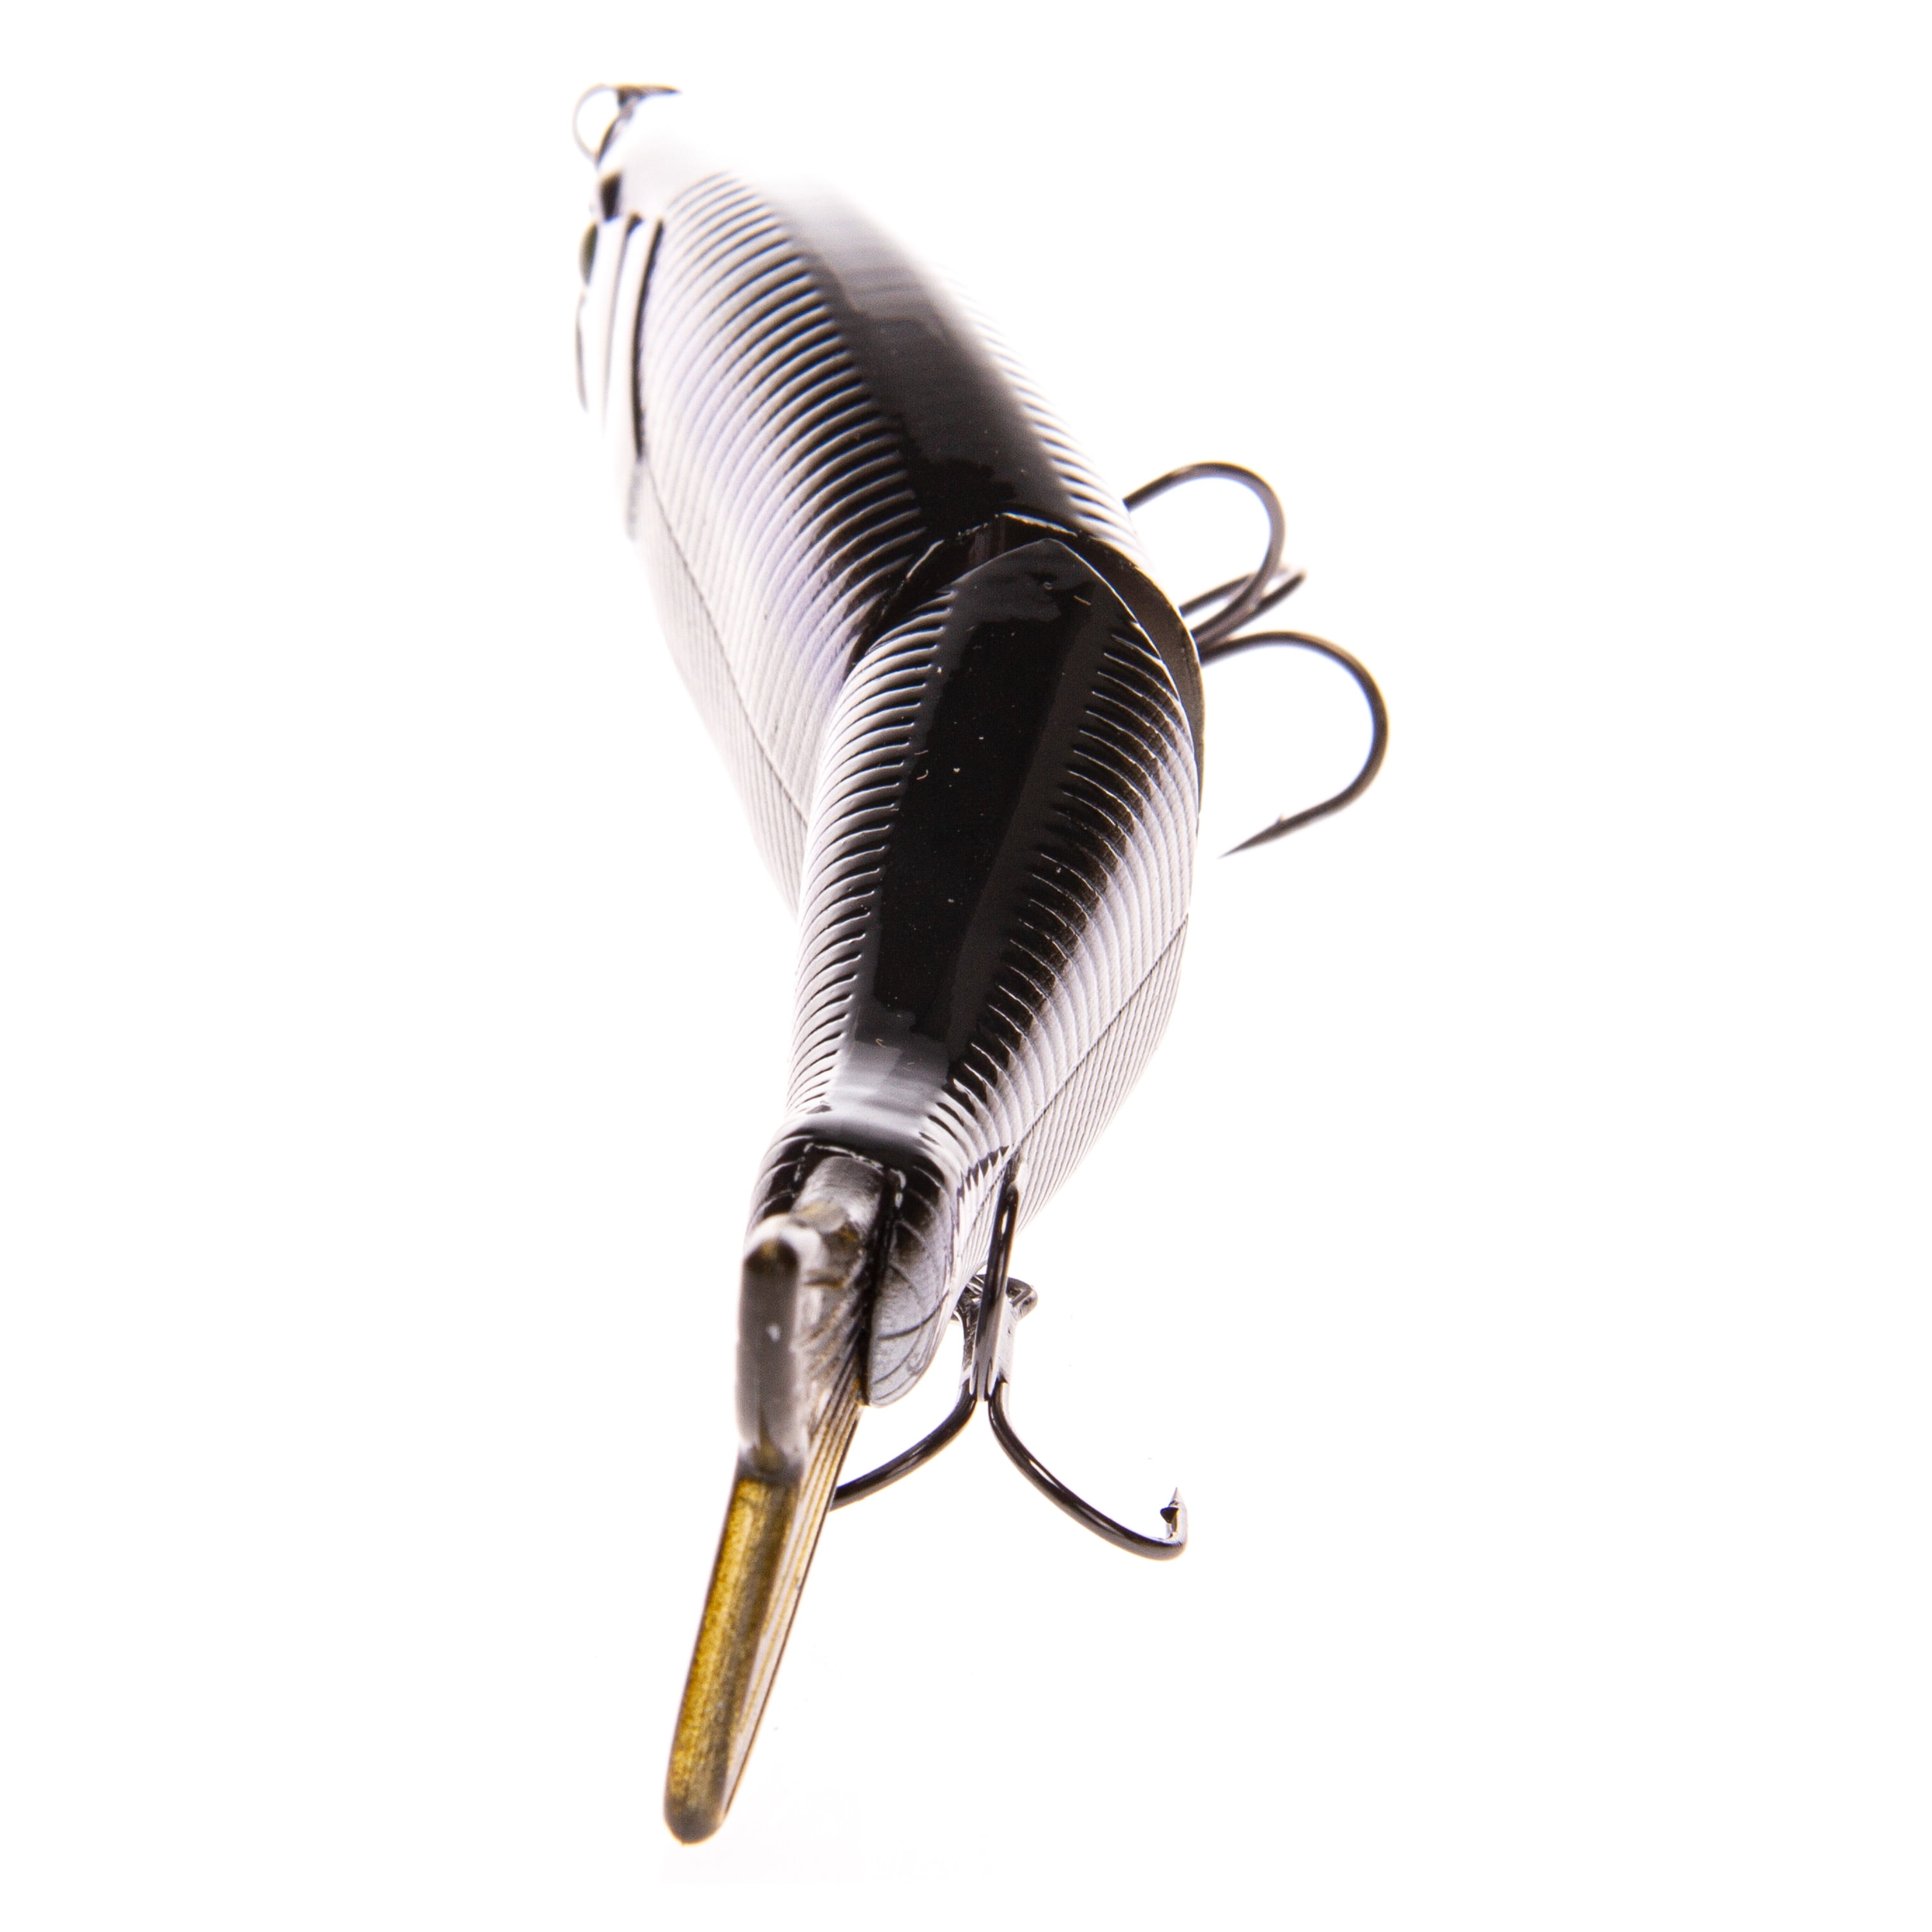 Ozark Trail hard plastic Freshwater Swim Bait fishing lure 6 inch. Painted  in Fish attracting colors. 